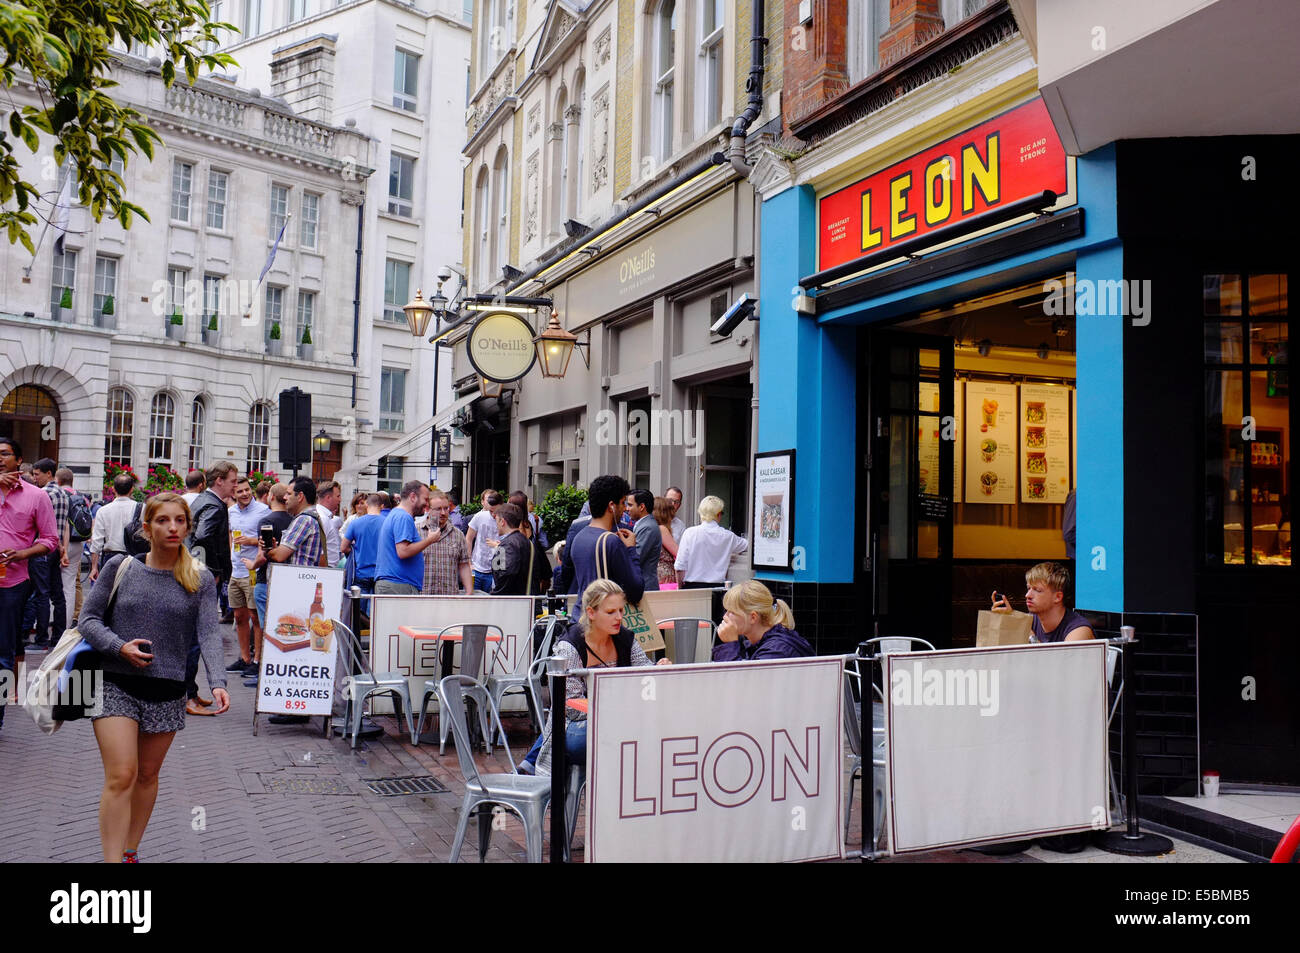 LEON burger restaurant with alfresco diners, in London Stock Photo